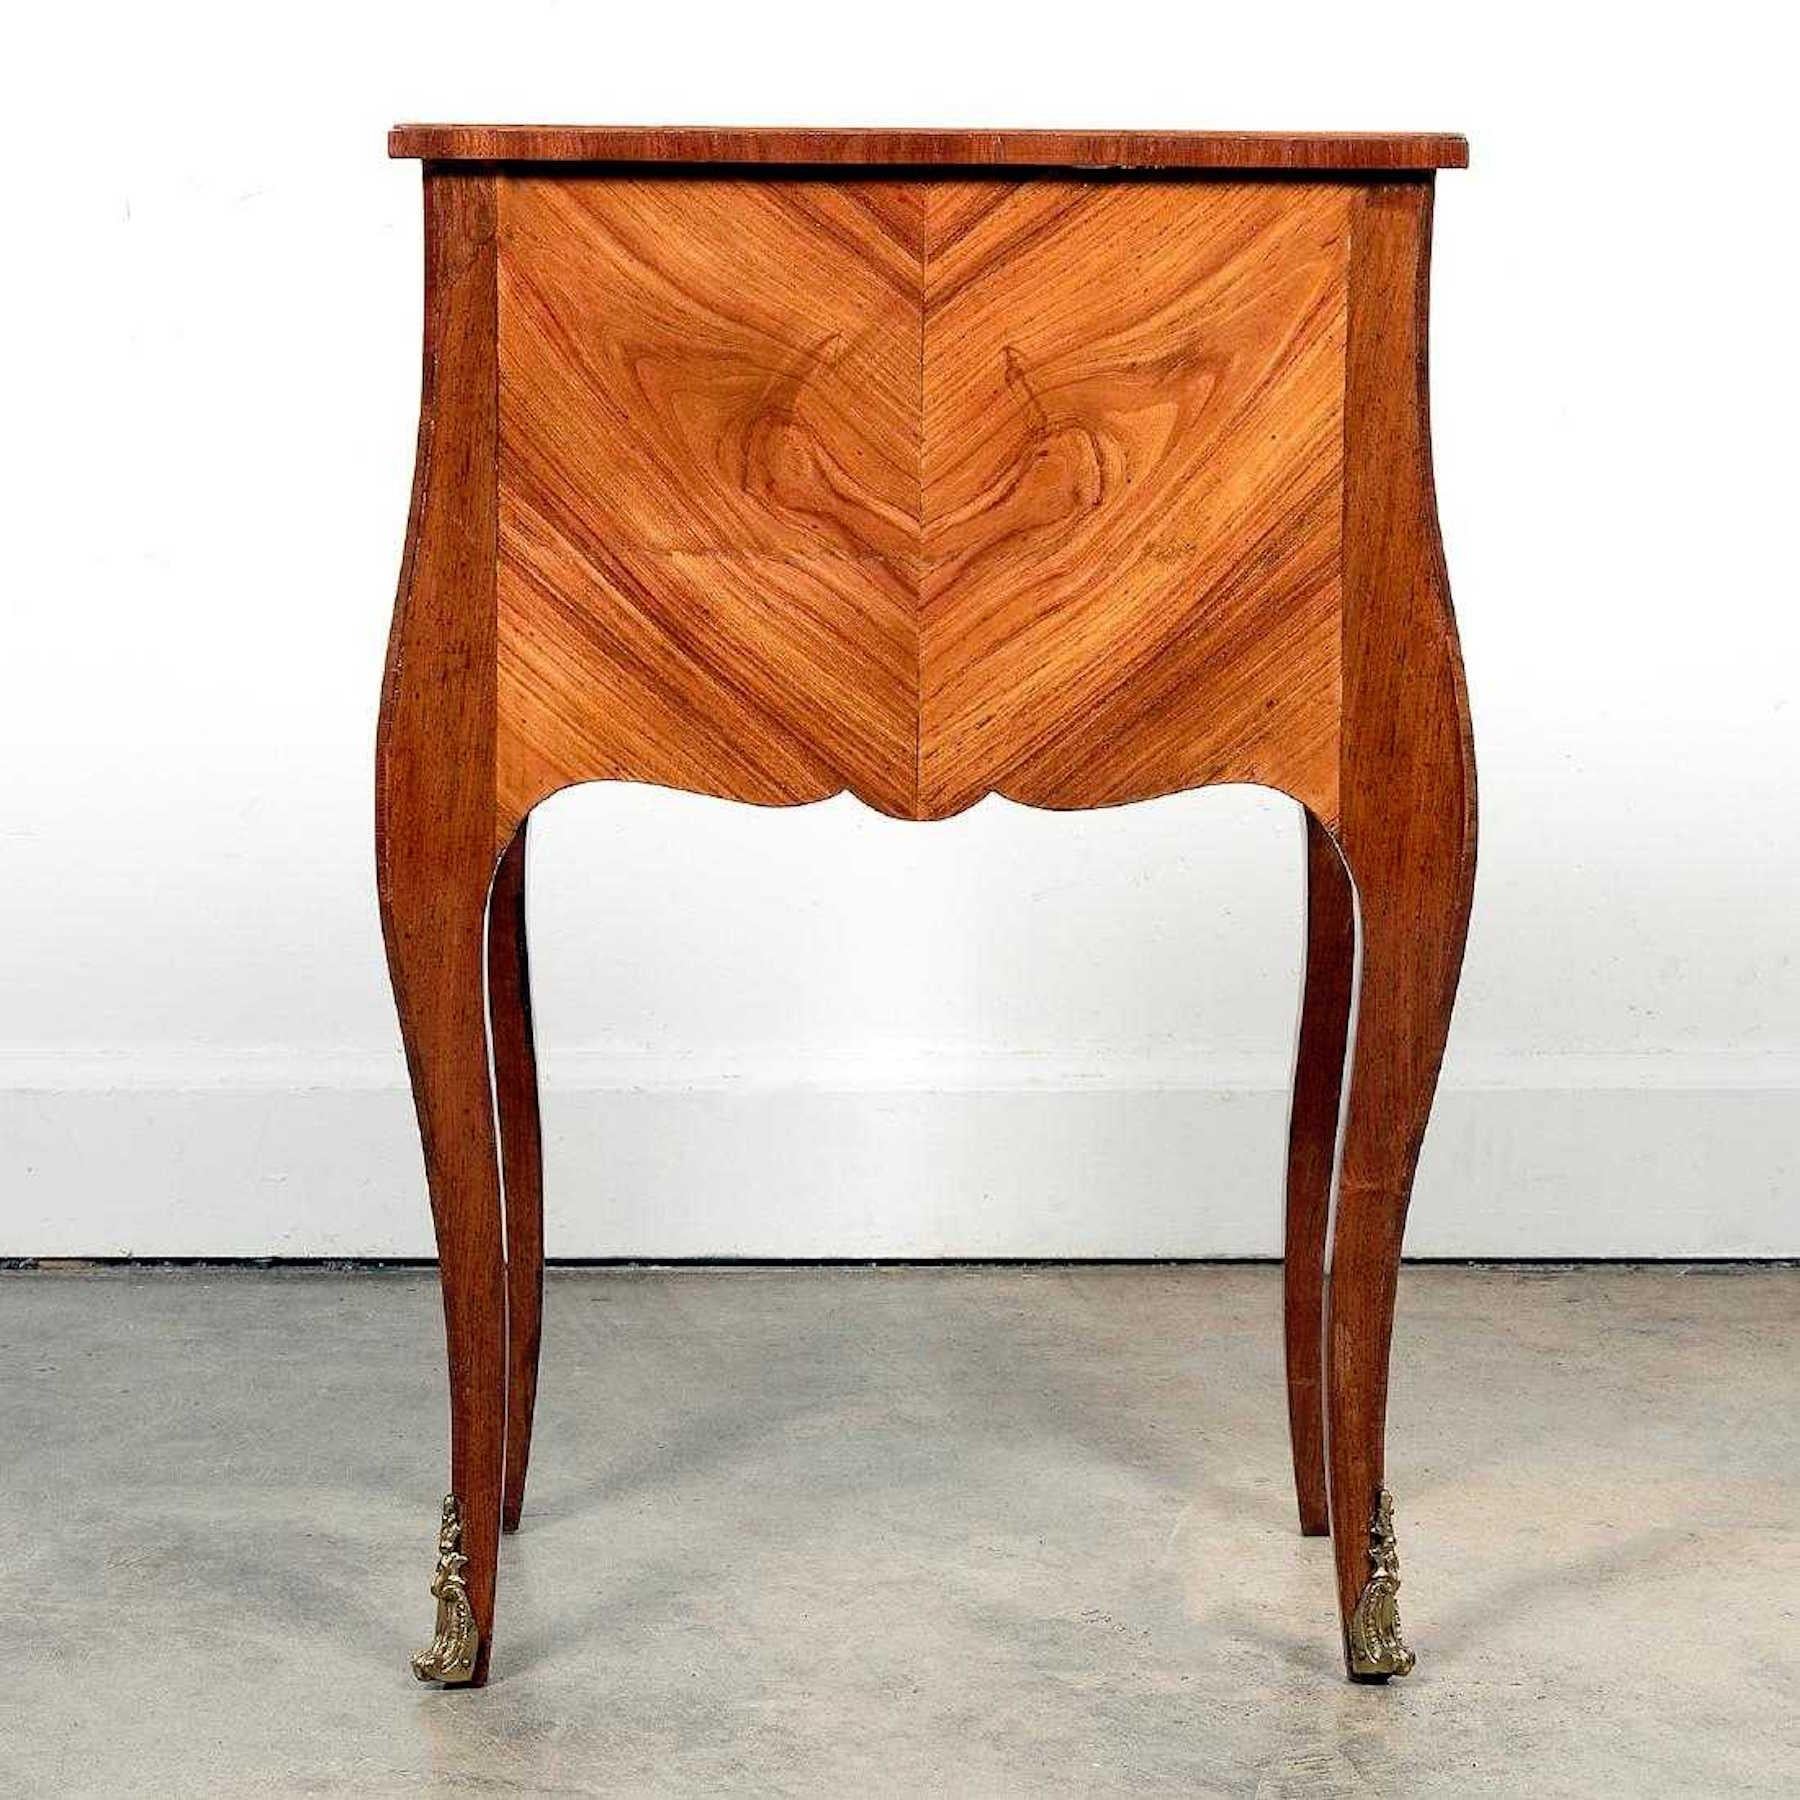 20th Century Louis XVI Style King and Tulip Wood Marquetry End Table For Sale